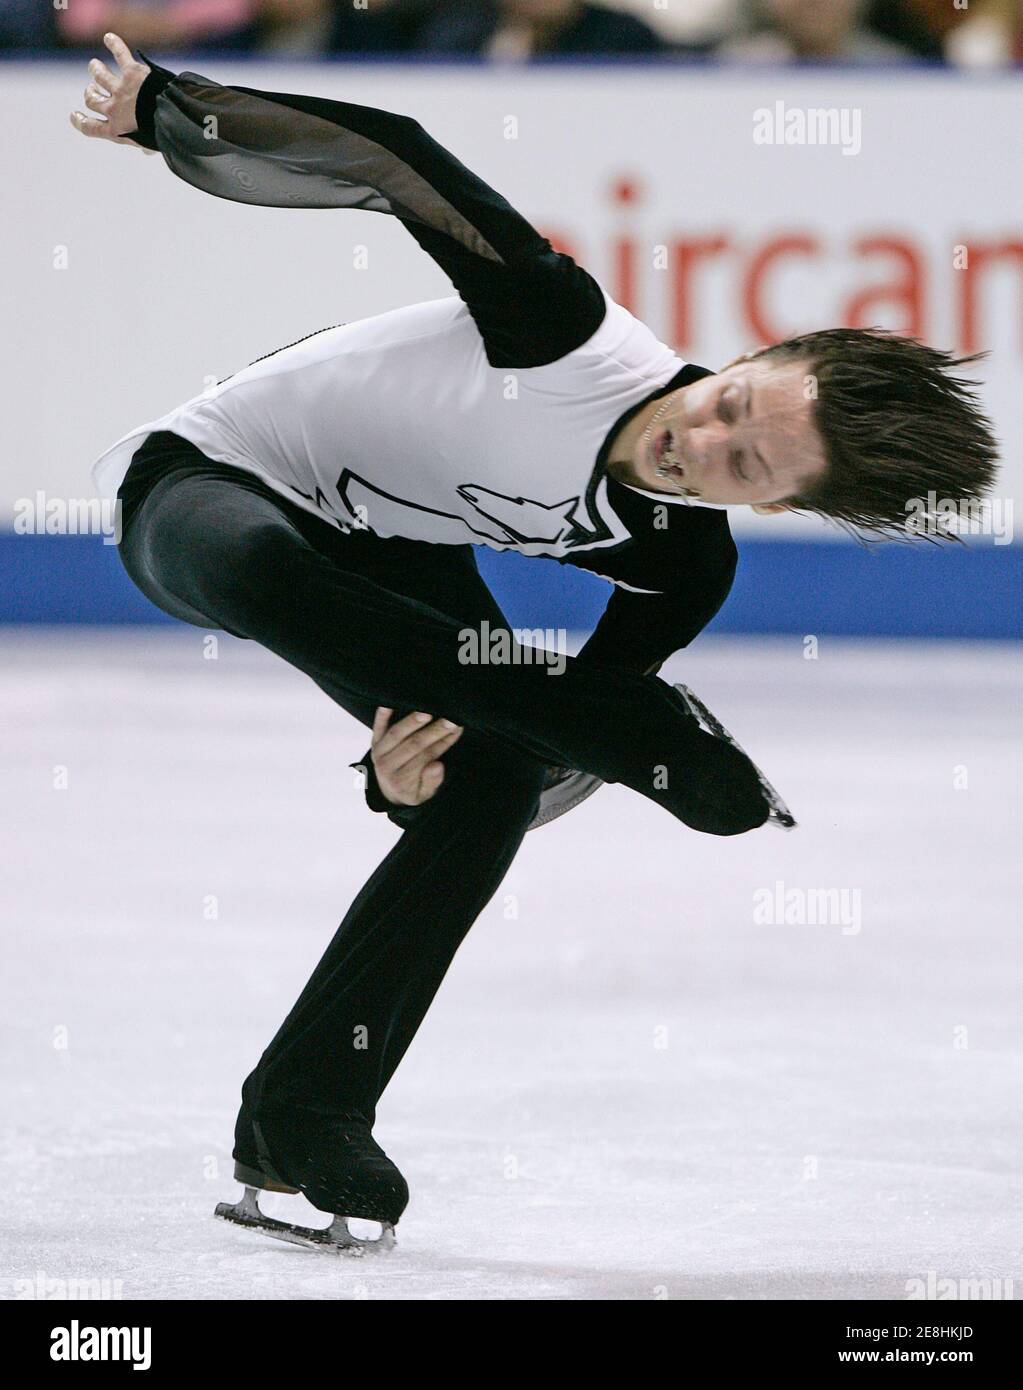 U.S. skater Johnny Weir competes in the men's short program during Skate Canada figure skating competition in Victoria, British Columbia November 3, 2006.     REUTERS/Andy Clark (CANADA) Stock Photo